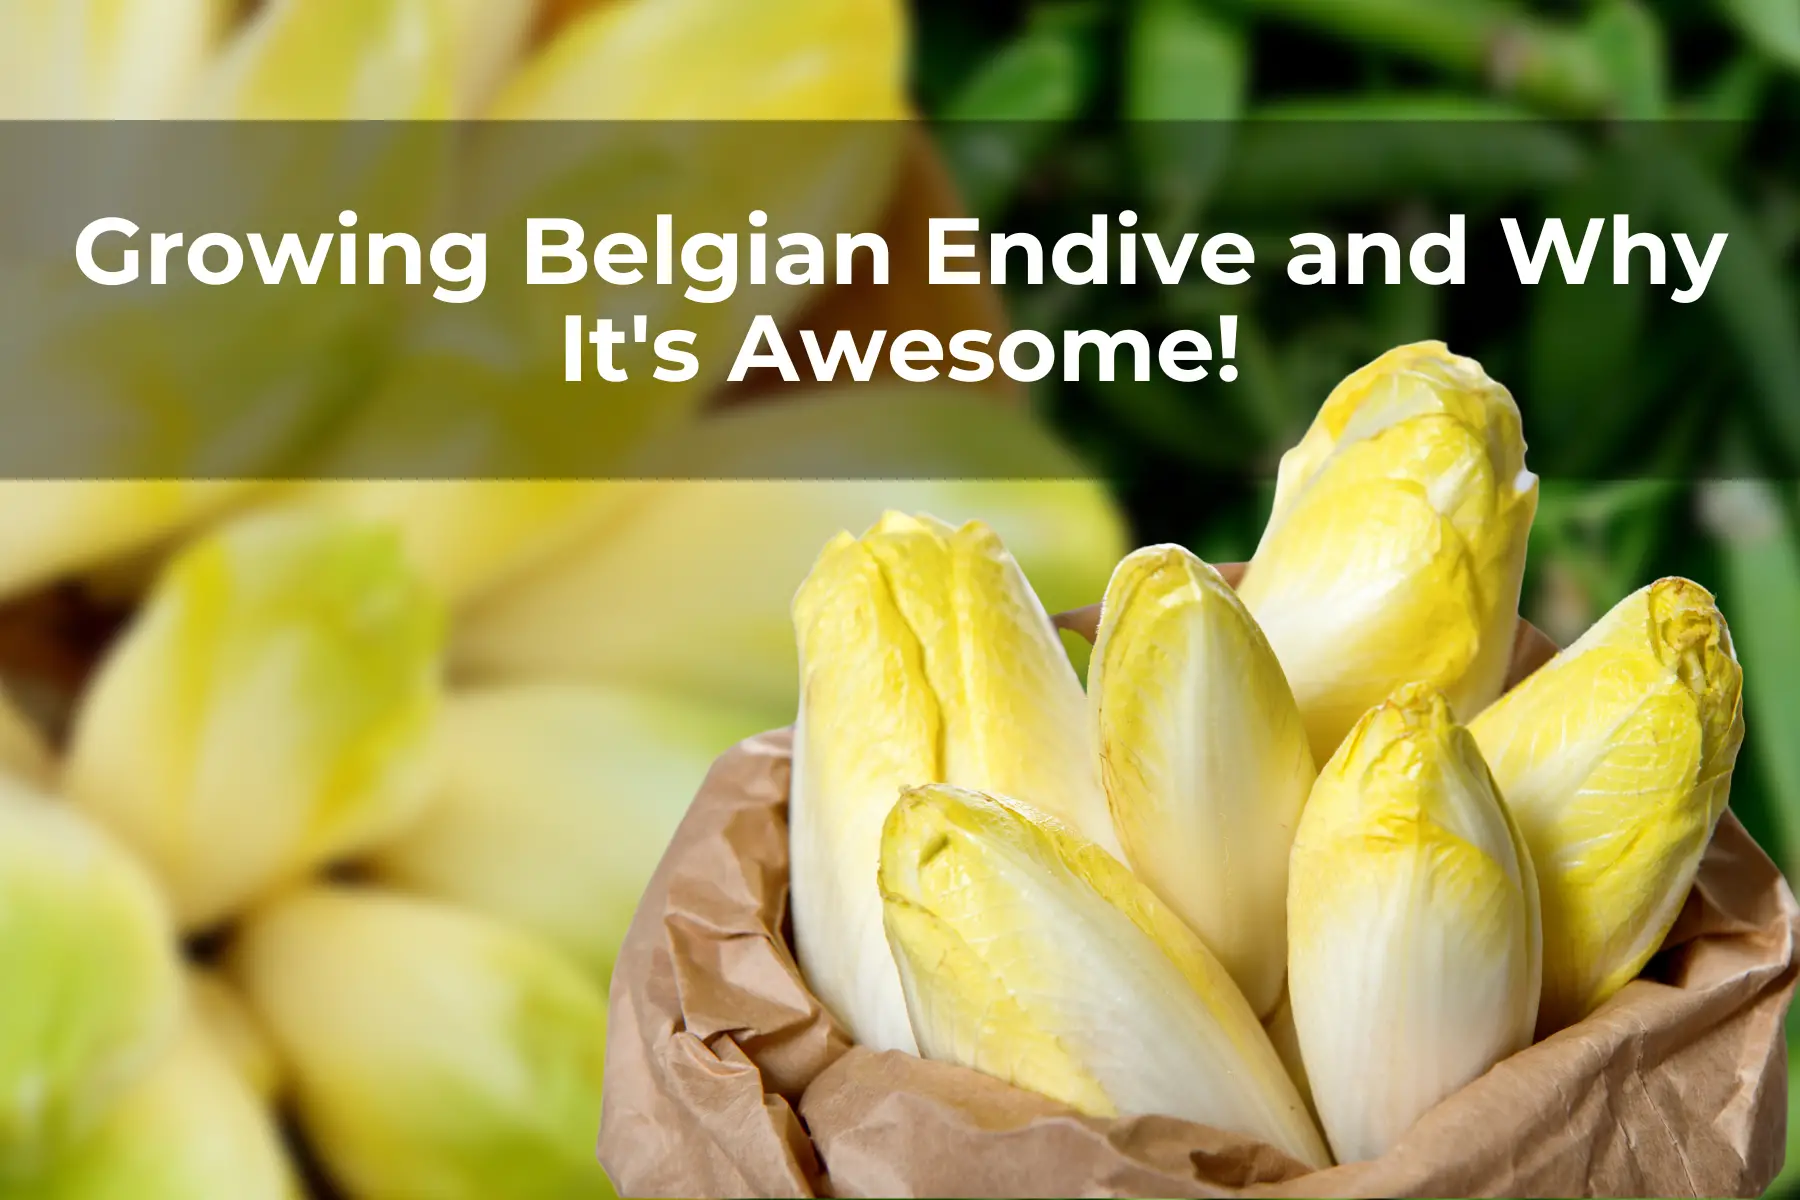 Growing Belgian Endive and Why It's Awesome!